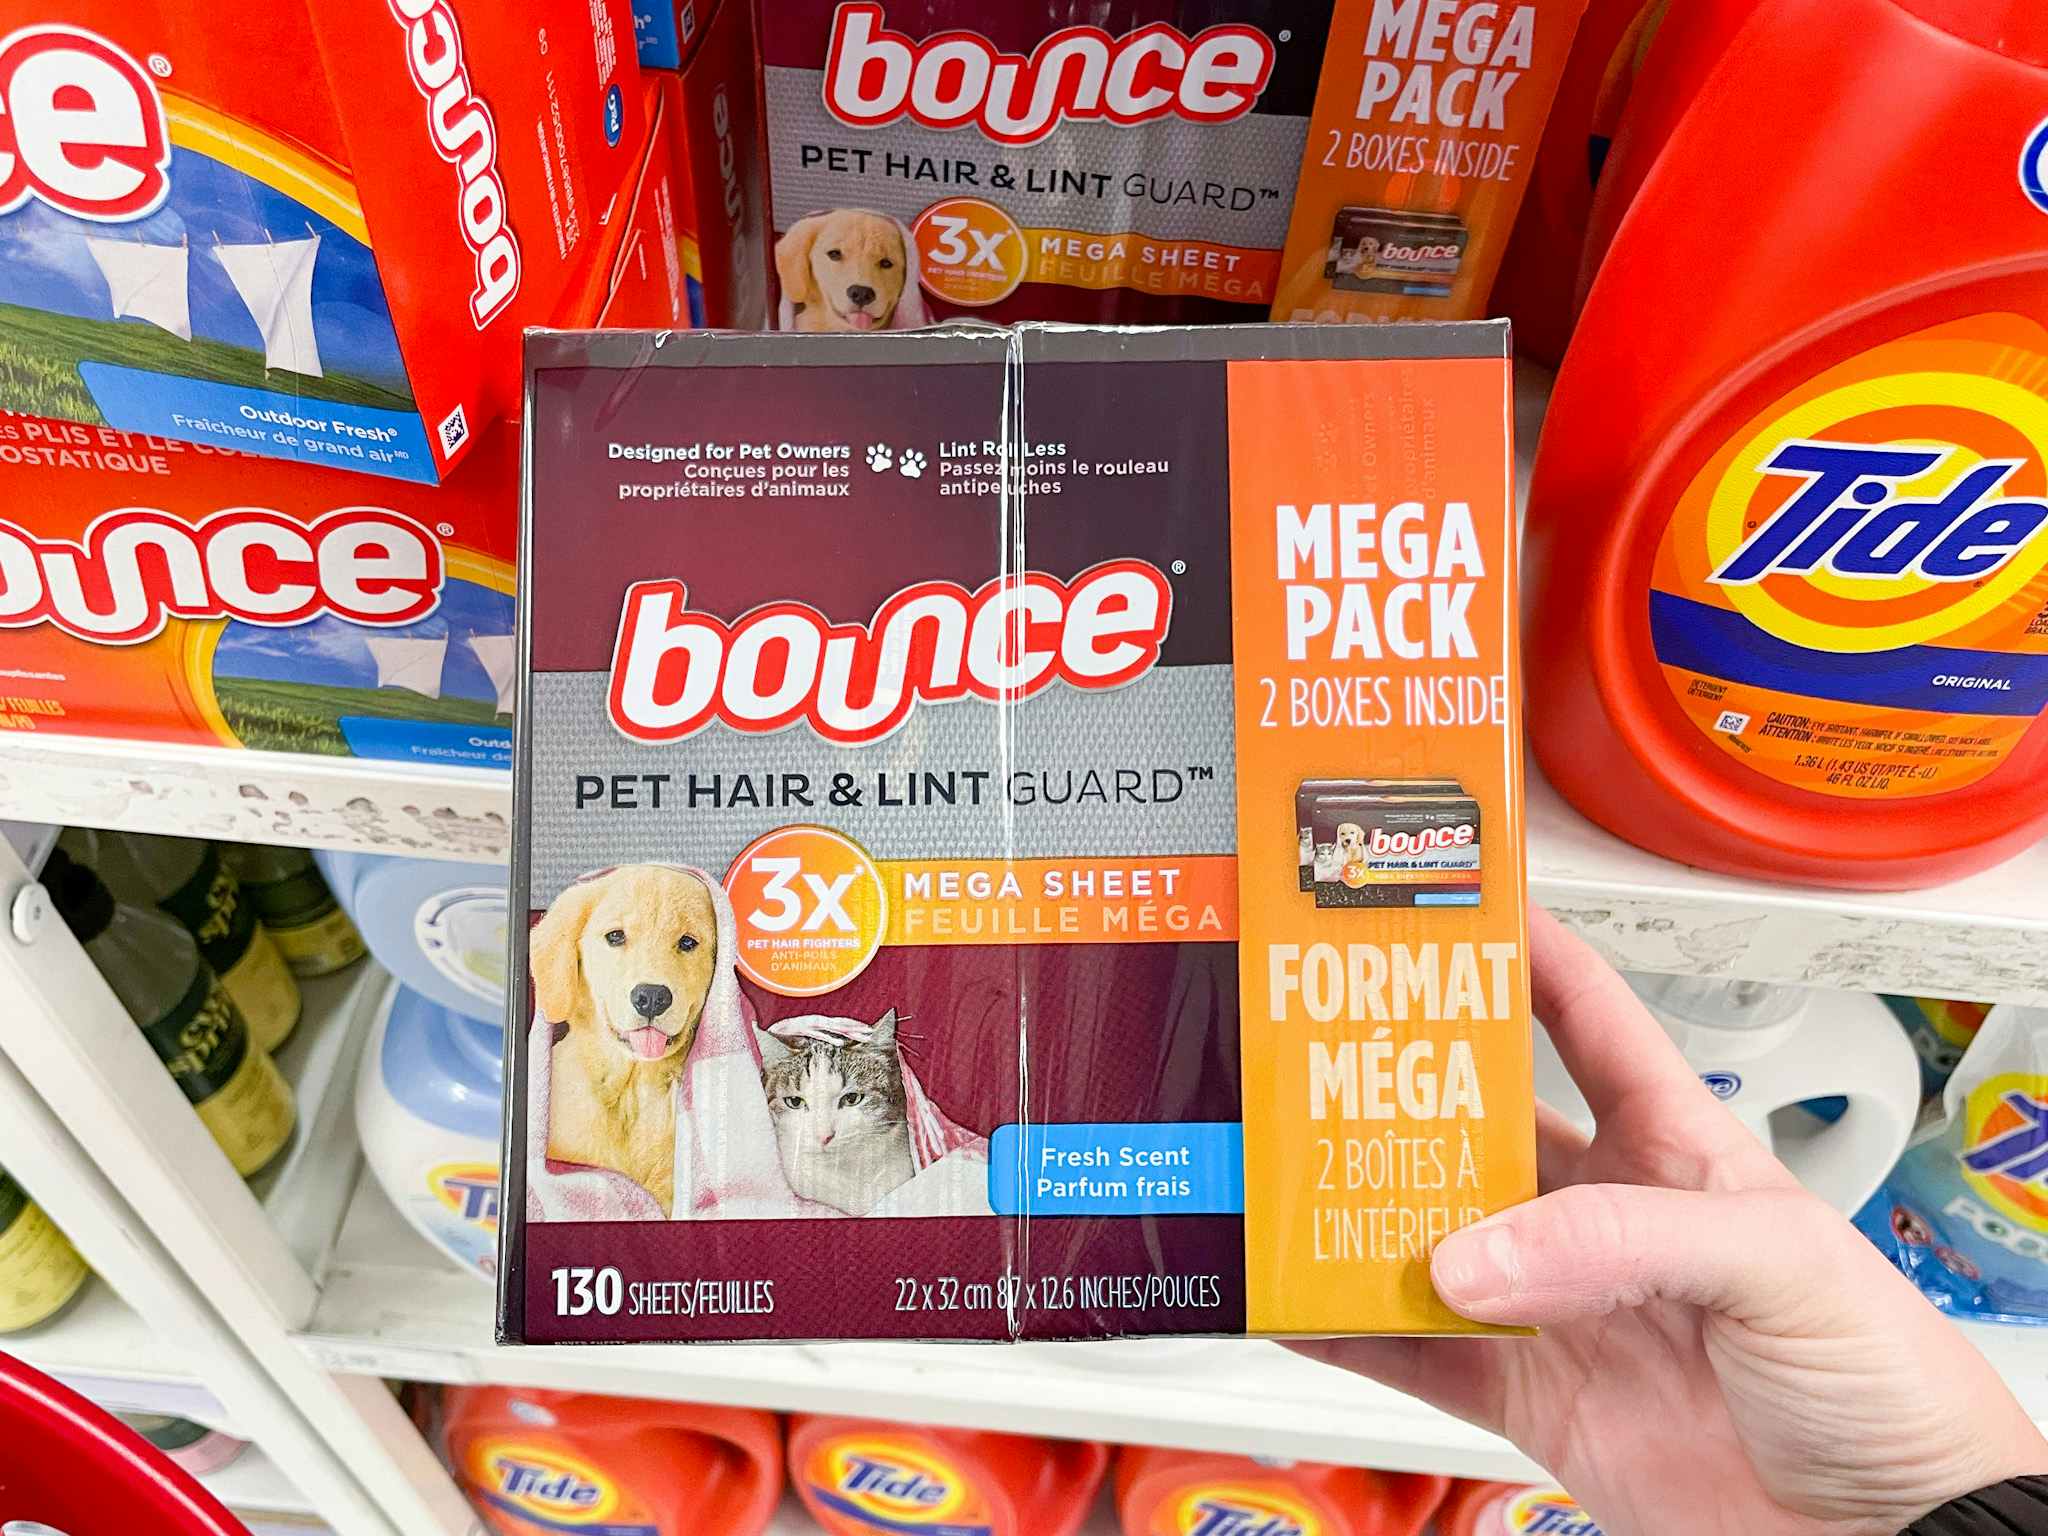 130 count box of bounce pet & link guard dryer sheets